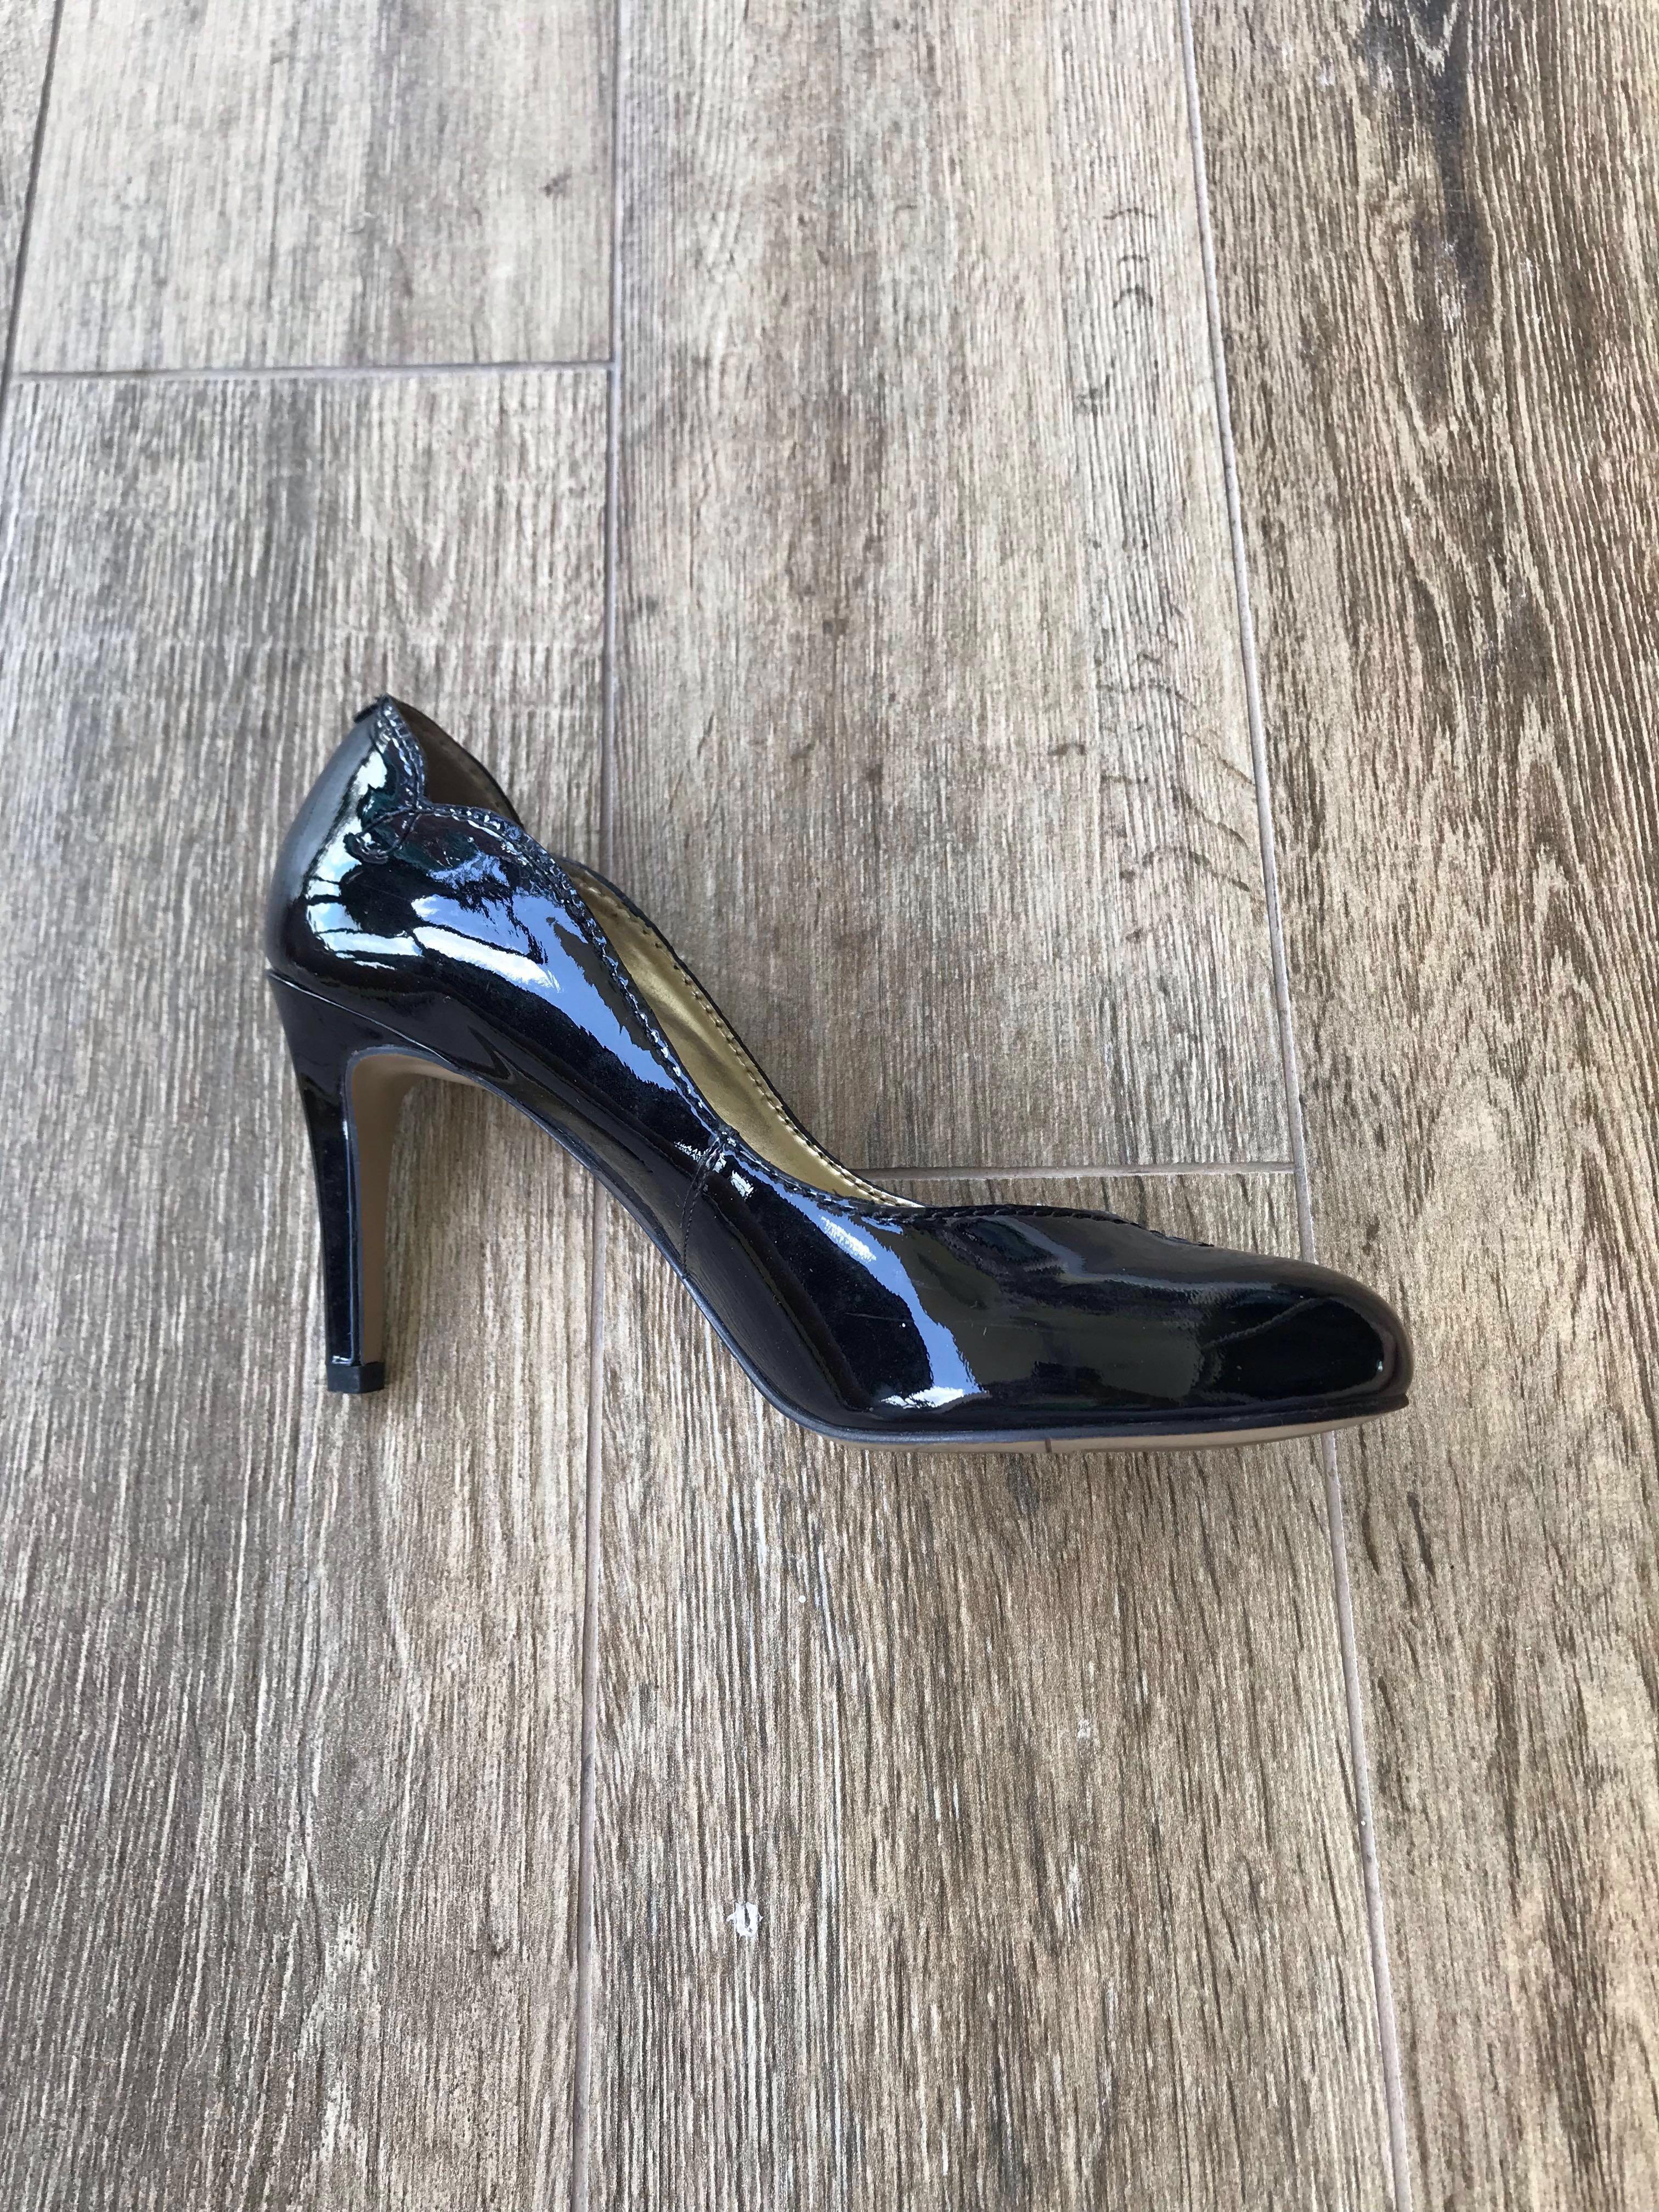 New Nine West Shoes for Sale in Garden Grove, CA - OfferUp